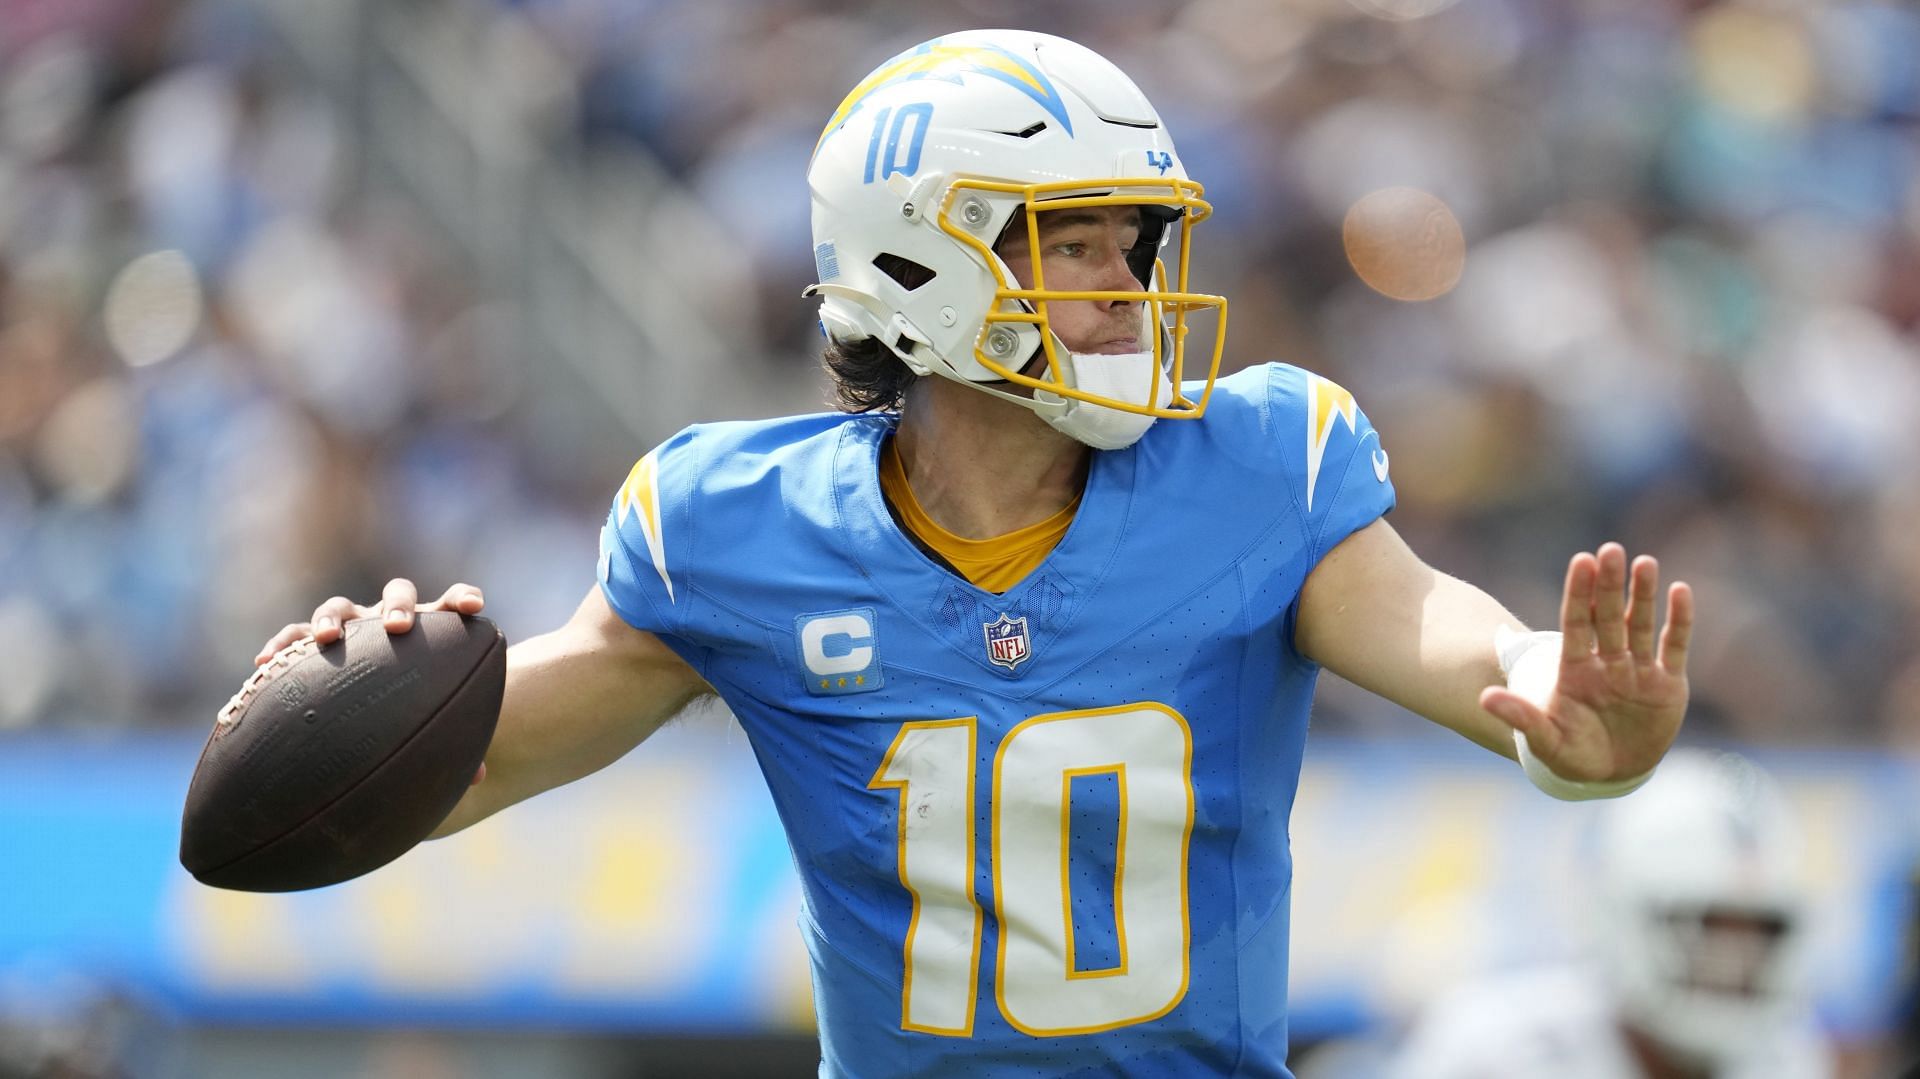 The Los Angeles Chargers came up short